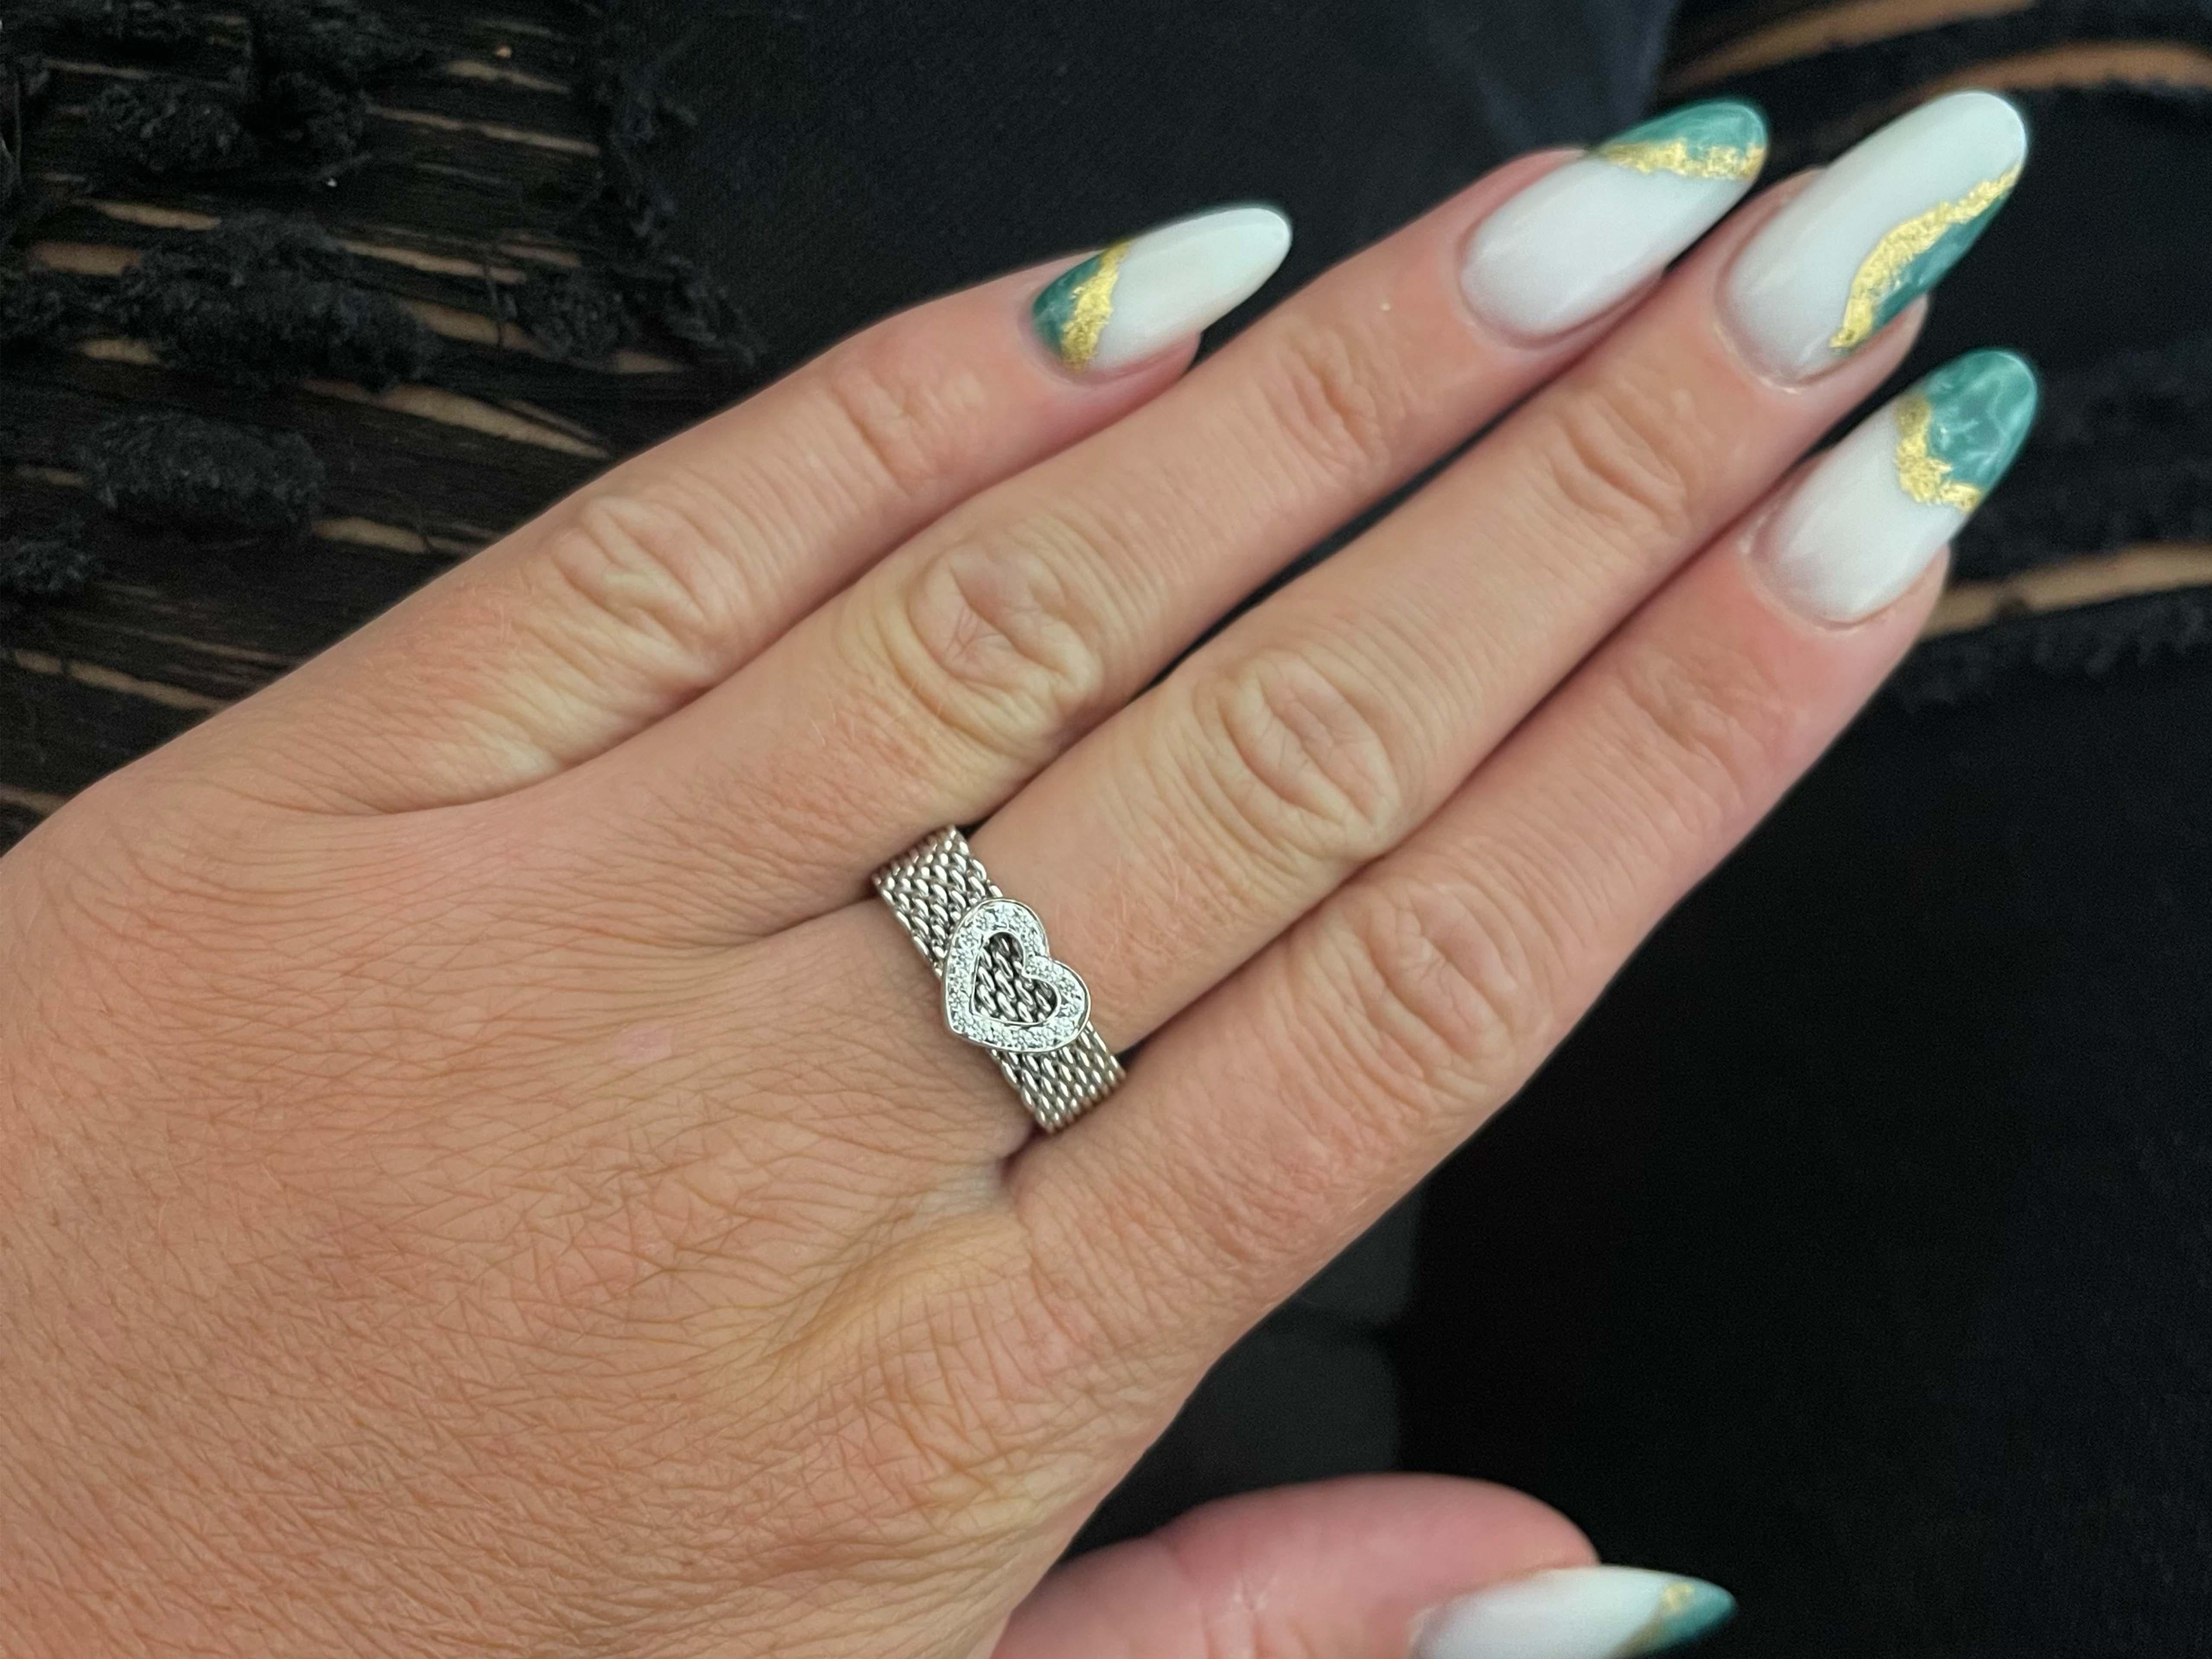 Authentic Tiffany & Co. Summerset Diamond Heart Ring in 18k White Gold. This diamond heart mesh ring is beautifully crafted in 18k white gold with 18 diamonds on the heart. The diamonds are F-G in color and VS in clarity and total ~0.10 carats. The